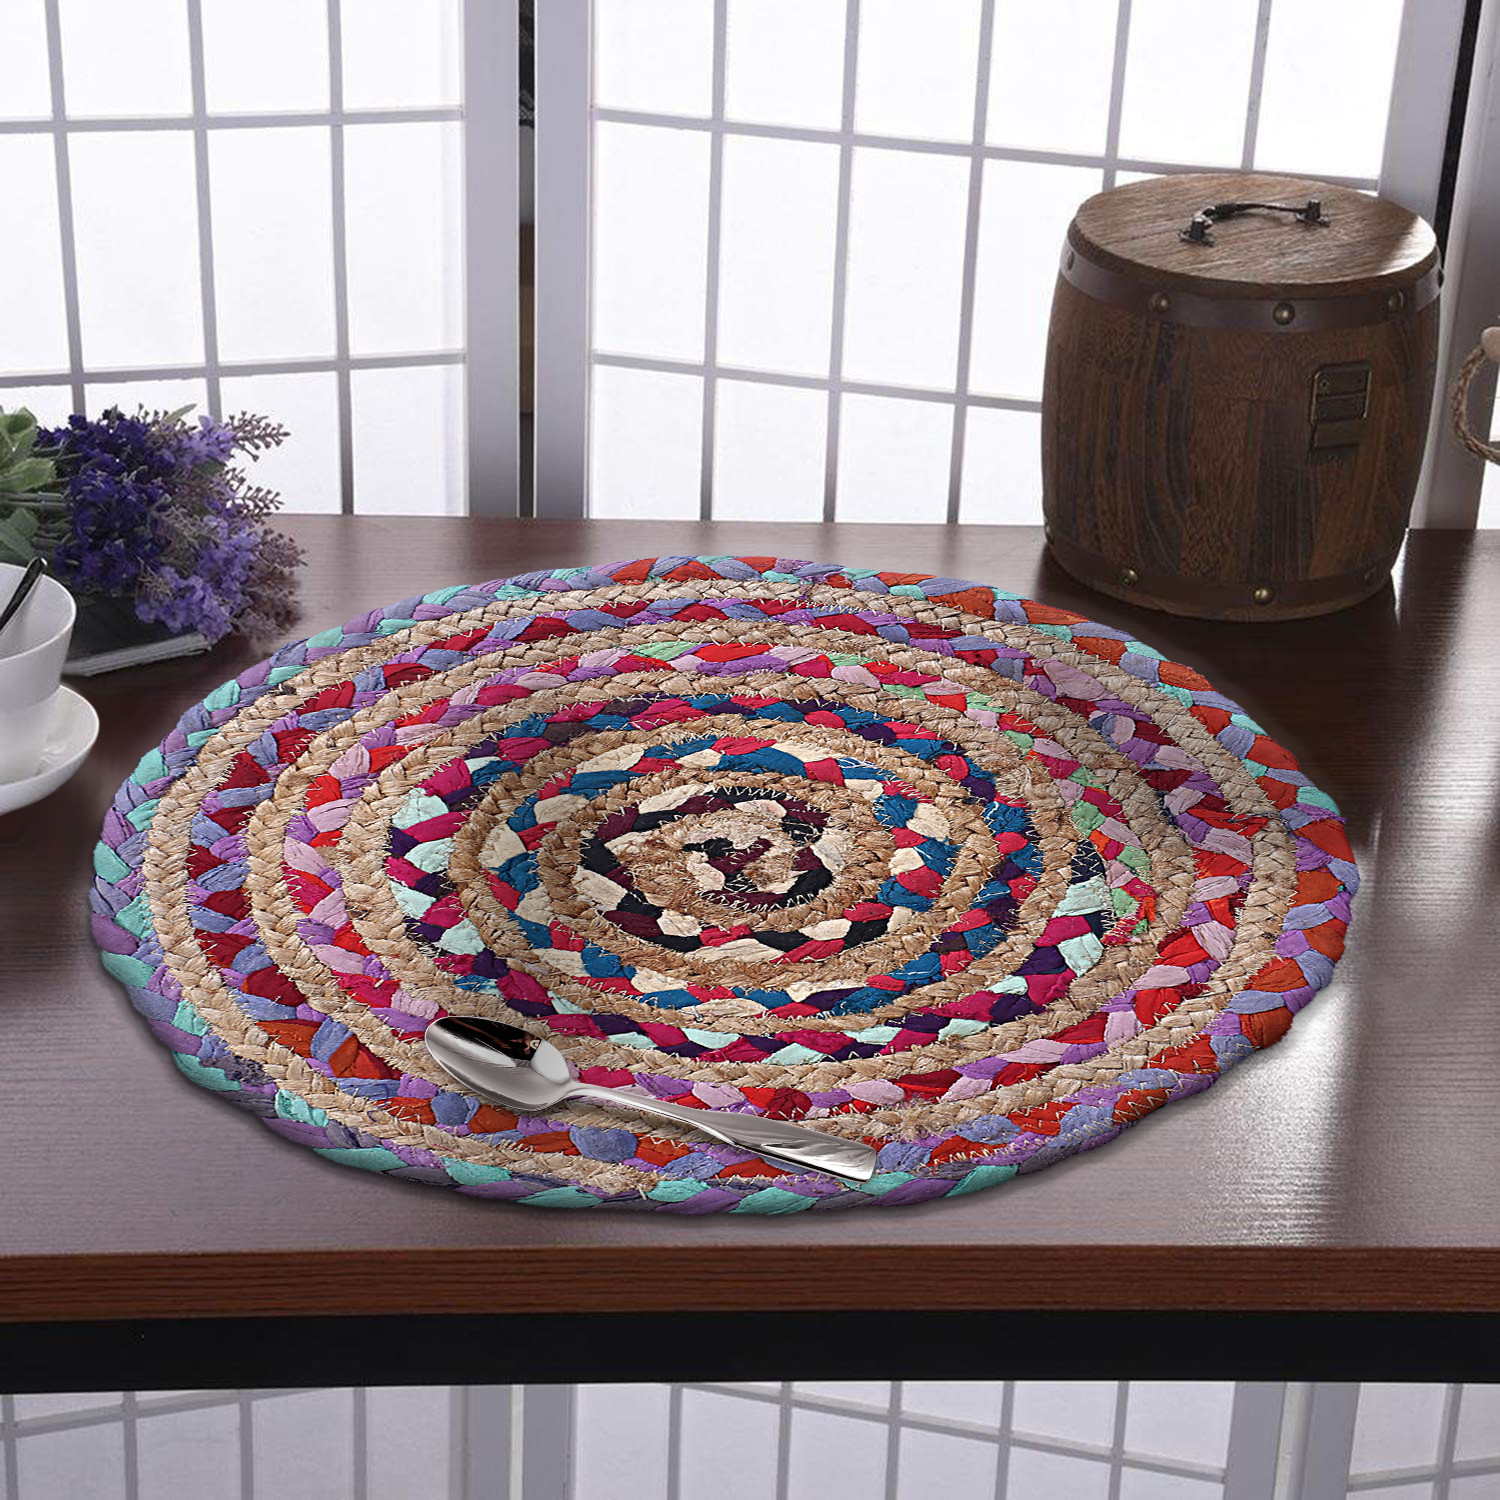 Kuber Industries Handmade Round Braided Carpet Rug|Organic Natural Jute Placemat For Bedroom,Living Room,Dining Room,37x37 cm,(Multicolor)